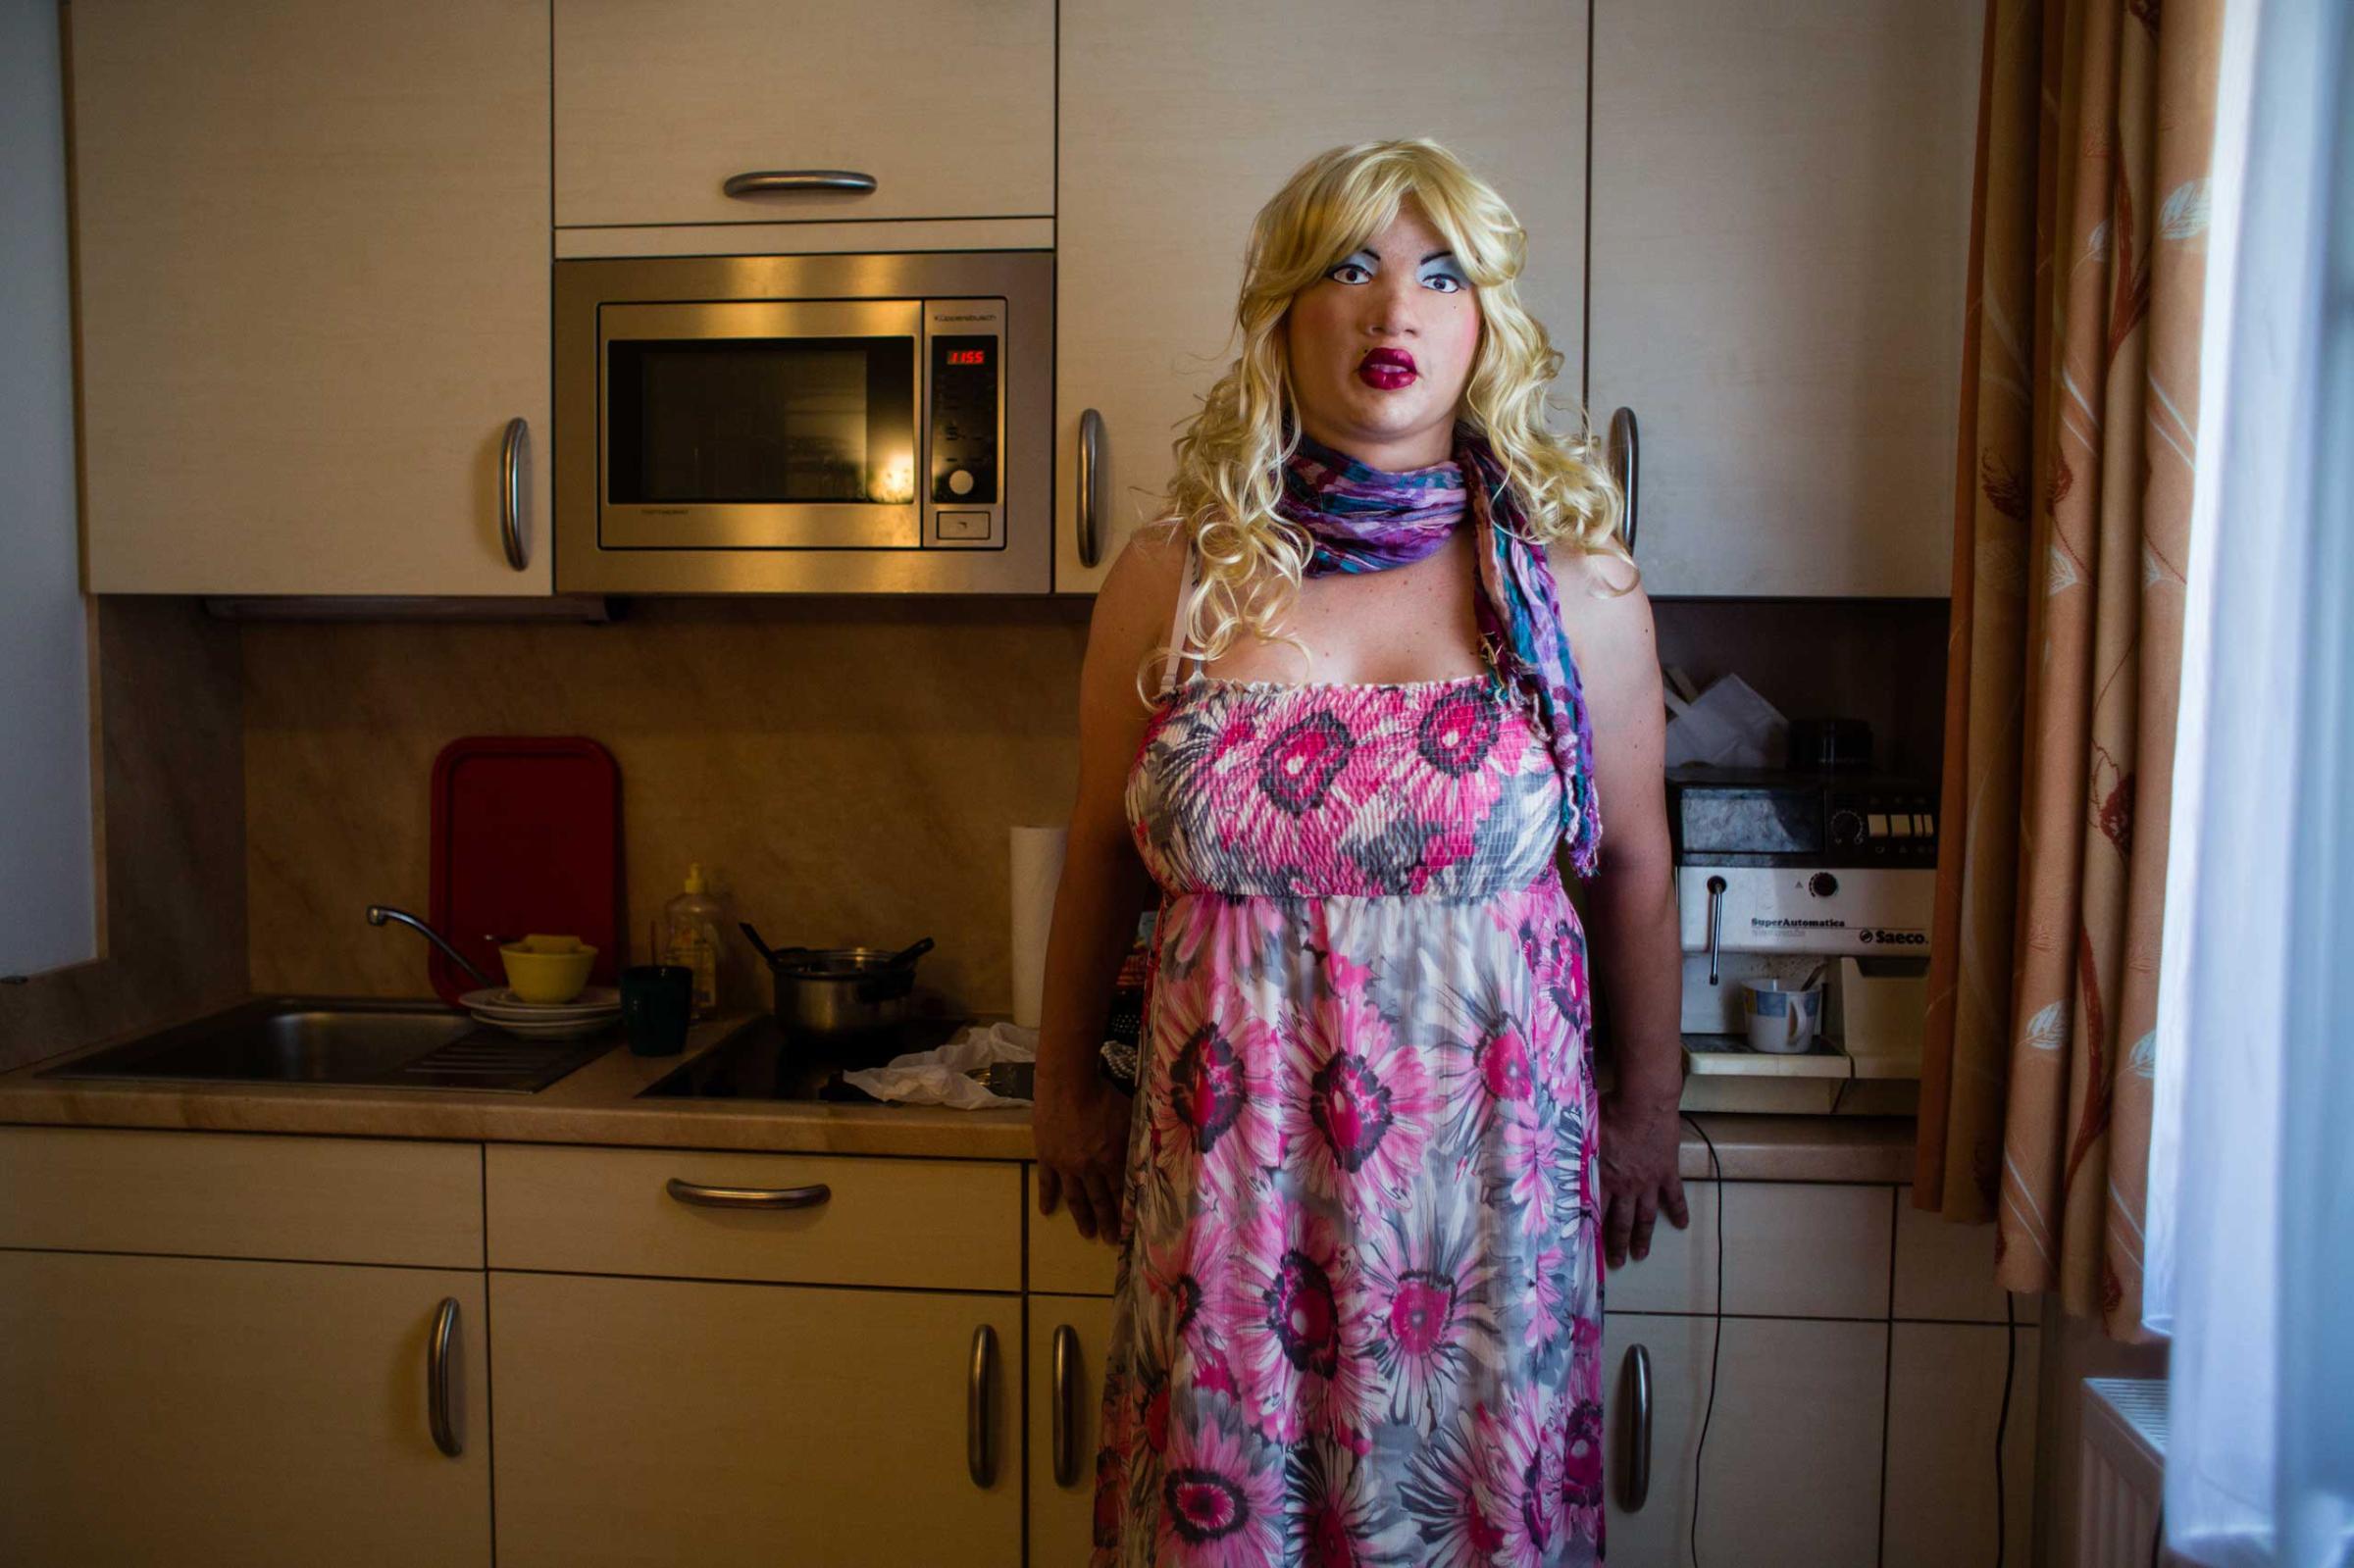 MUNICH, GERMANY - AUGUST 04, 2015: Portrait of female masker and transsexual woman 'Bear Girl', 39, in her kitchen, August 04, 2015 in Munich, Germany. "My biggest dream is to be a beautiful woman. I am not a topmodel and don't have an ideal physique, but the illusion is almost perfect. It is like being in another world, like a drug. I don’t smoke, I don’t drink, I have no passion other than that. For me it is a way of living out a deeper part of myself. "- Female Masker Leyla alias Bear Girl, 39, transsexual woman